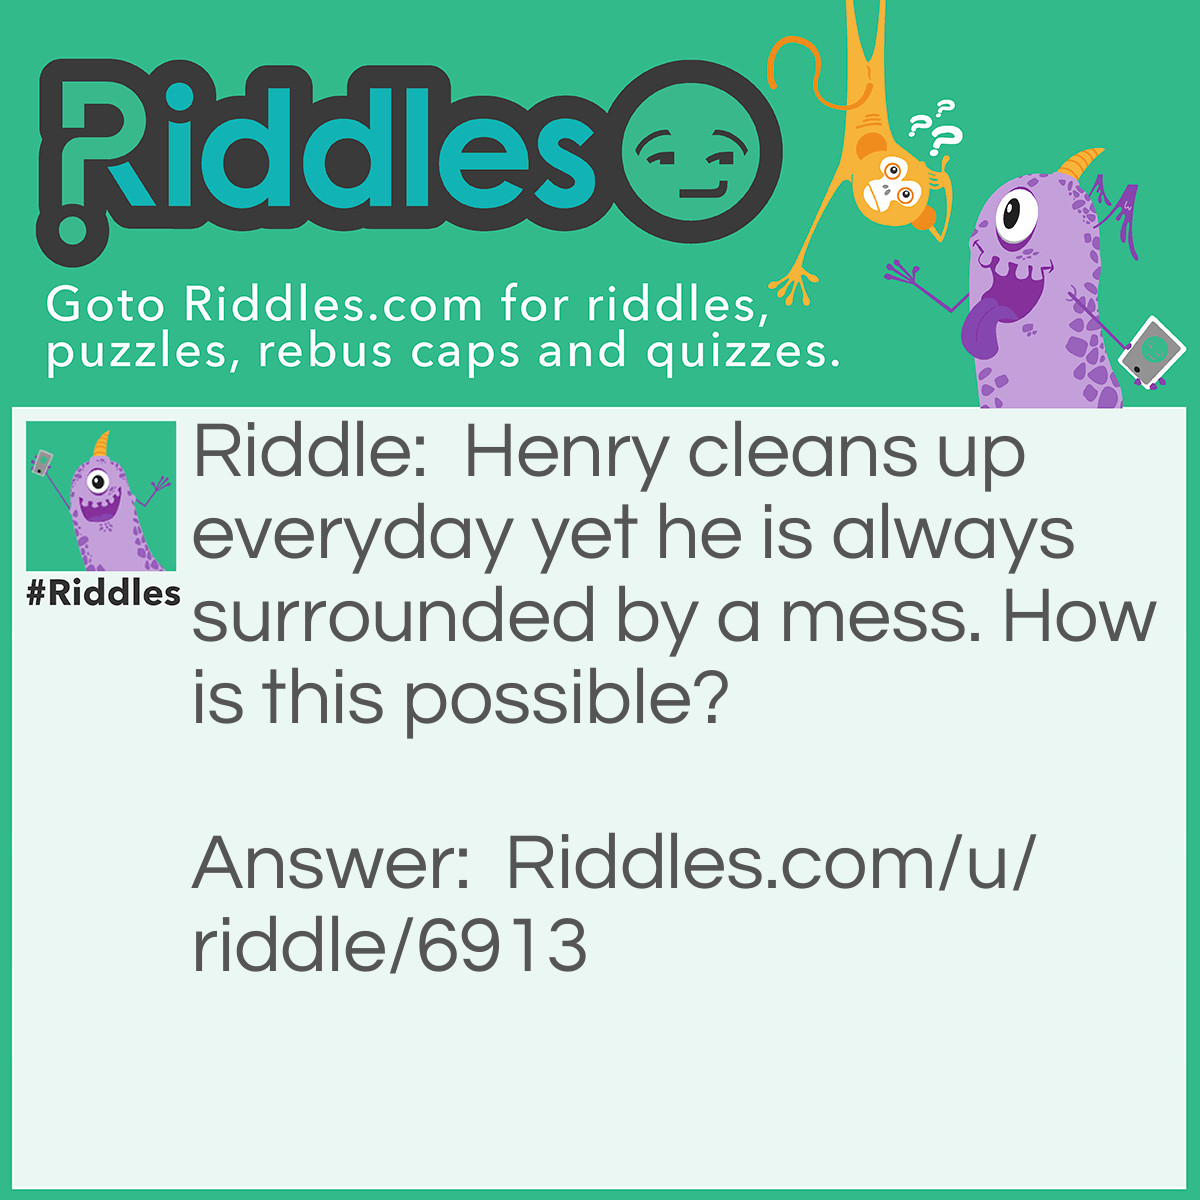 Riddle: Henry cleans up everyday yet he is always surrounded by a mess. How is this possible? Answer: Henry is a hoover; therefore everything he vacuums will stay in his hoover's sac.